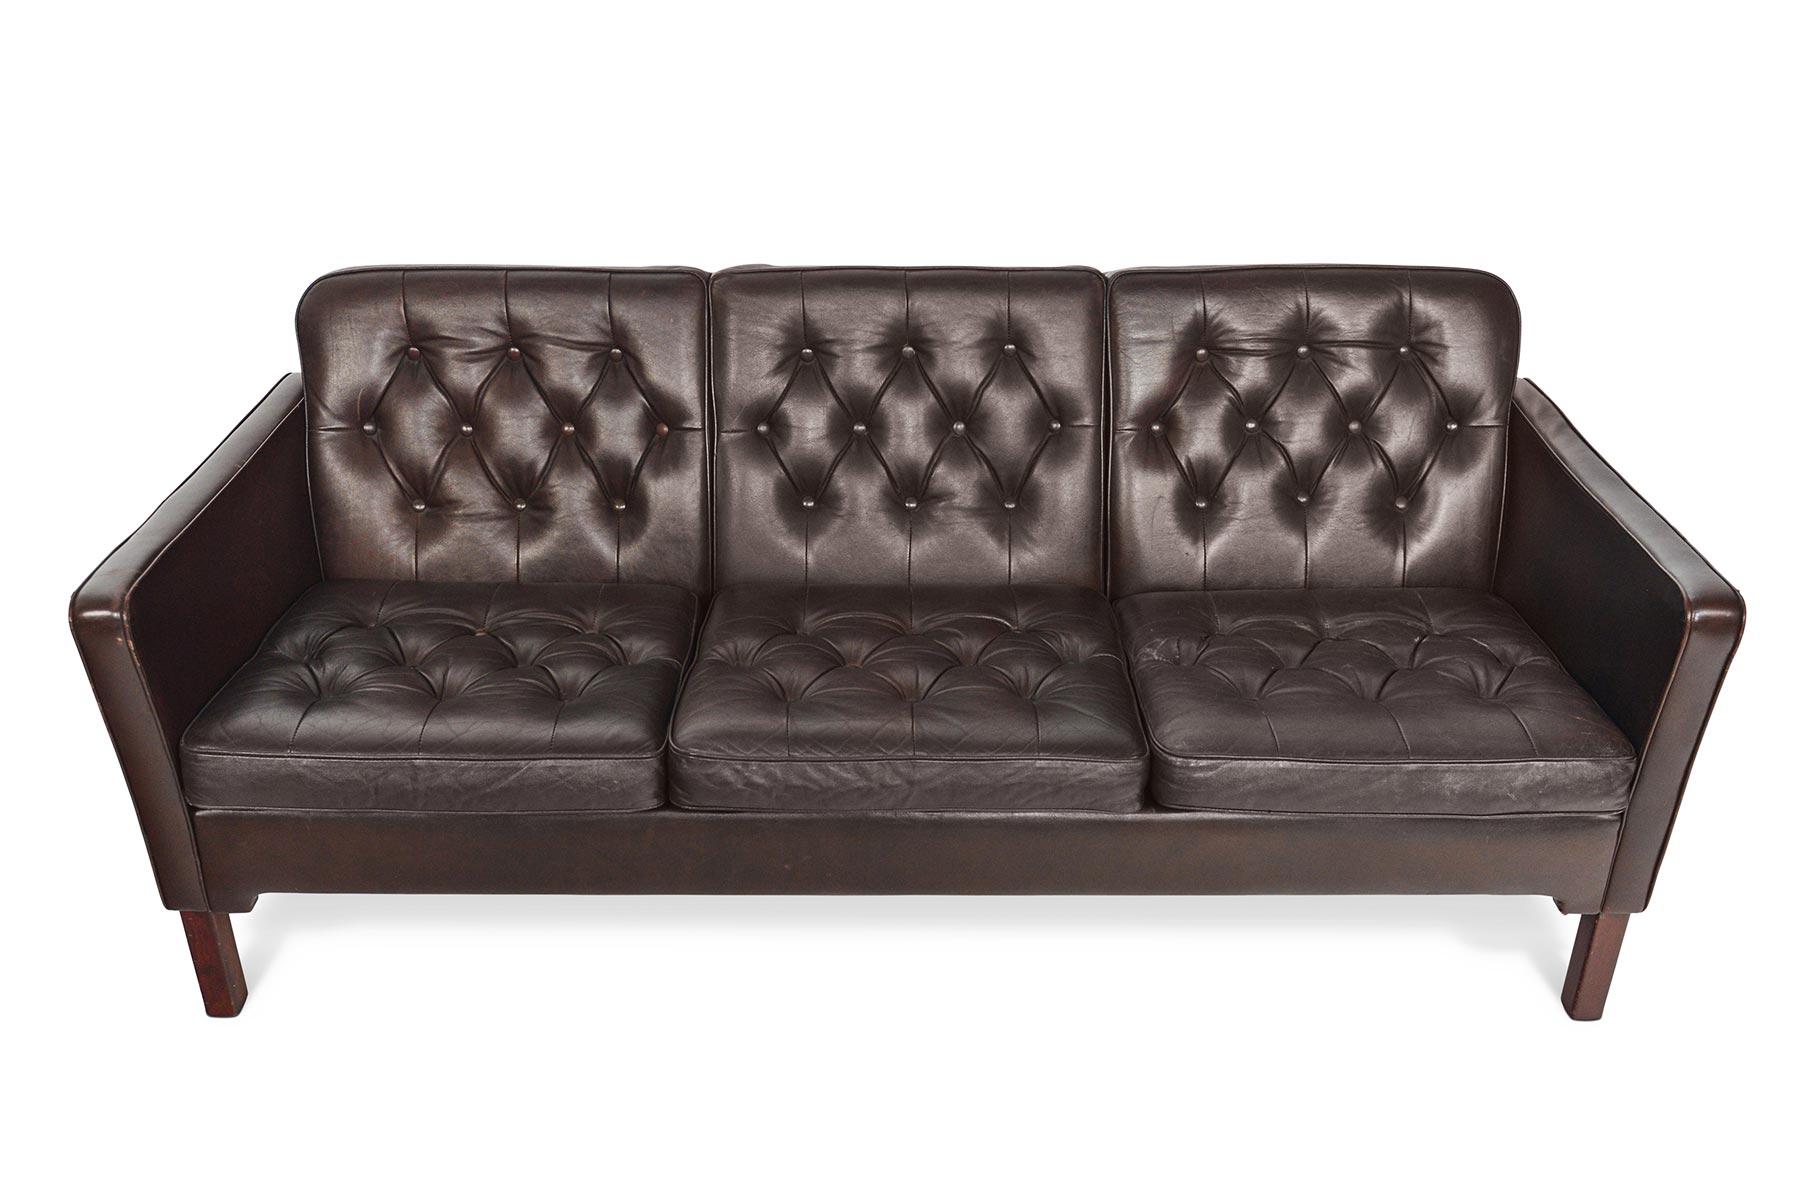 This stunning Danish modern chocolate brown patinated leather sofa offers rich detailing in a sleek, modern silhouette. This beautifully tapered frame holds six button tufted cushions. Sofa stands on stained beech legs. Upholstered on all sides. In